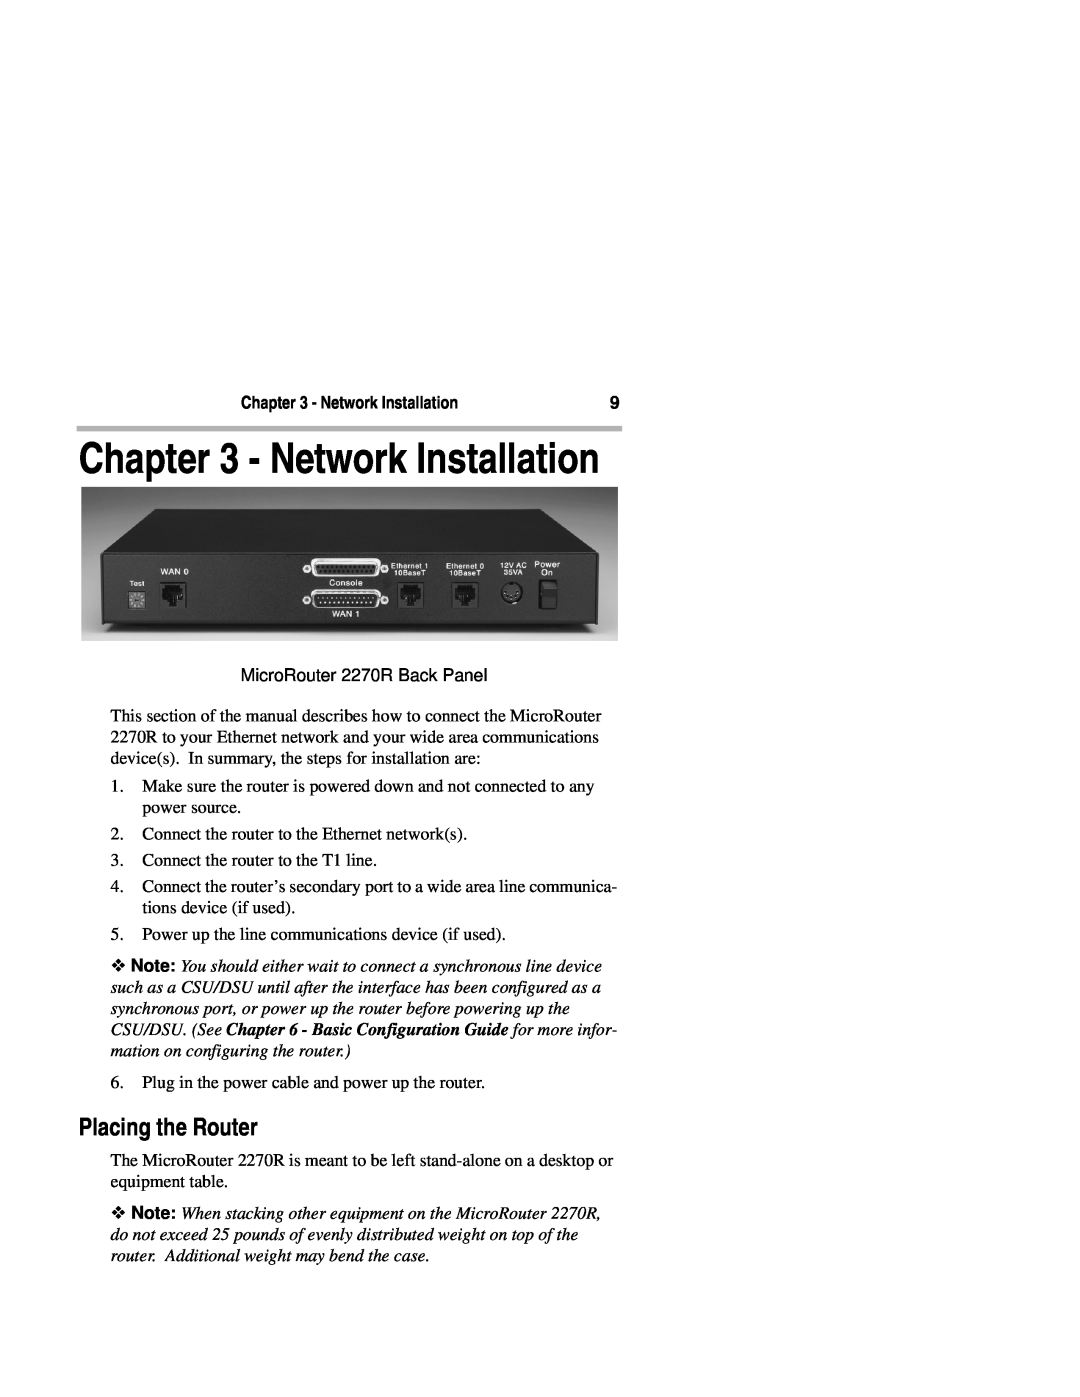 Compatible Systems 2270R manual Network Installation, Placing the Router 